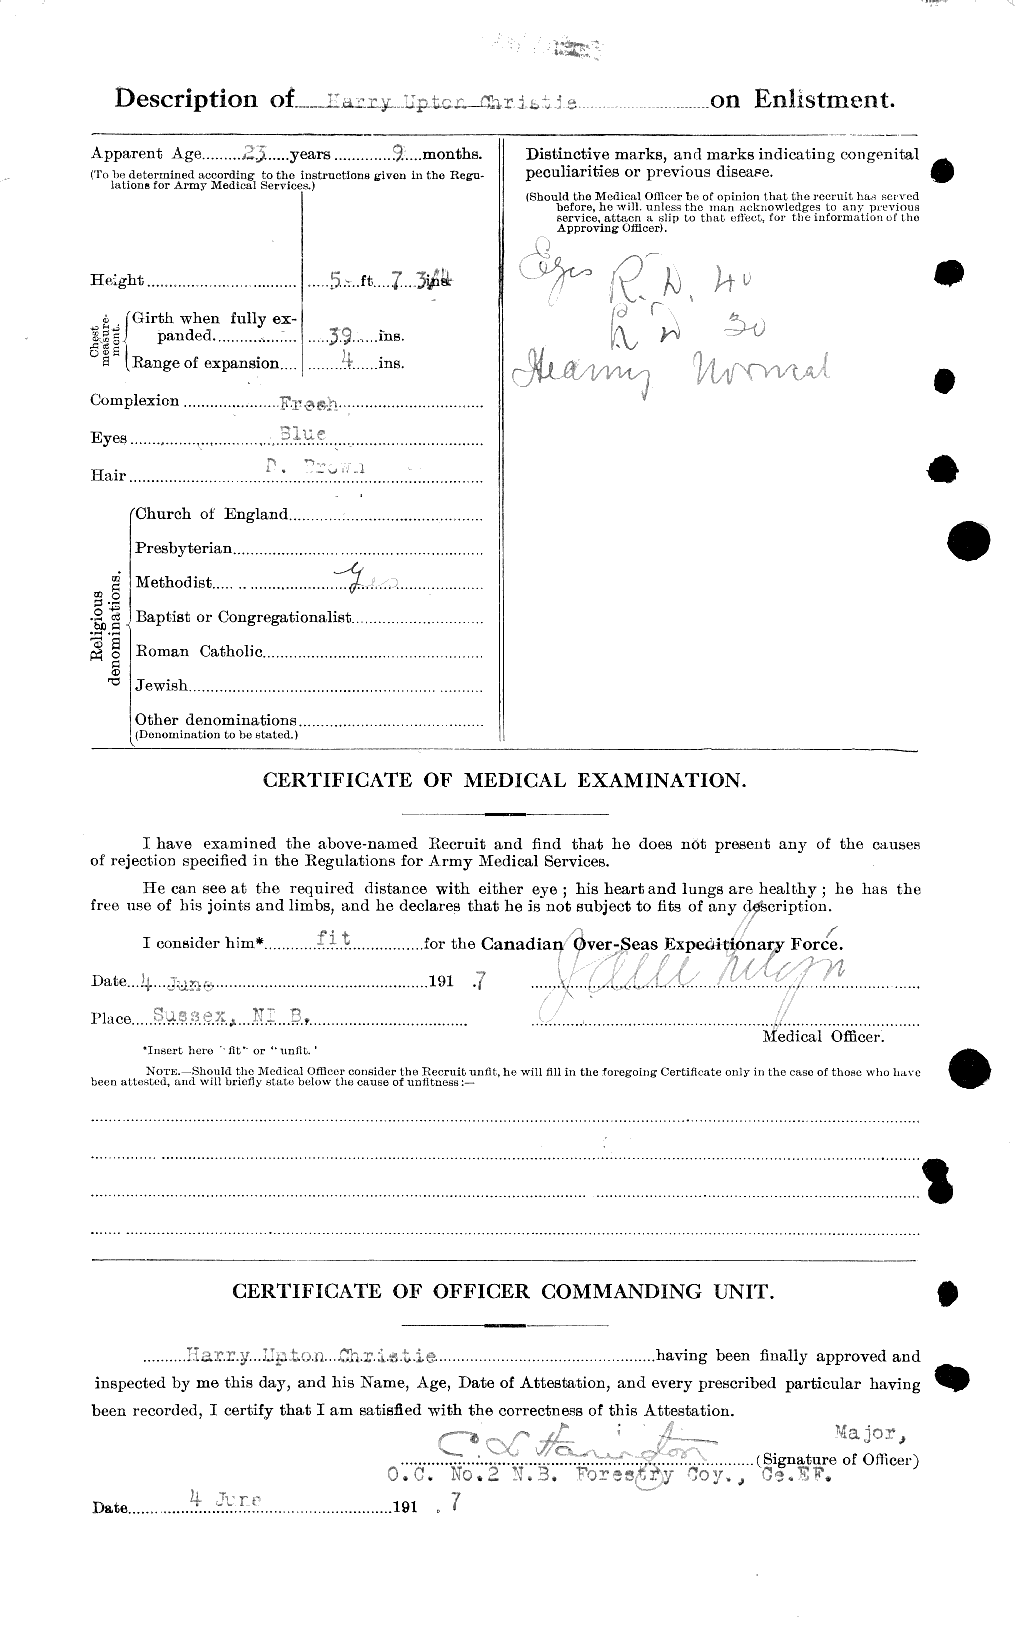 Personnel Records of the First World War - CEF 021959b